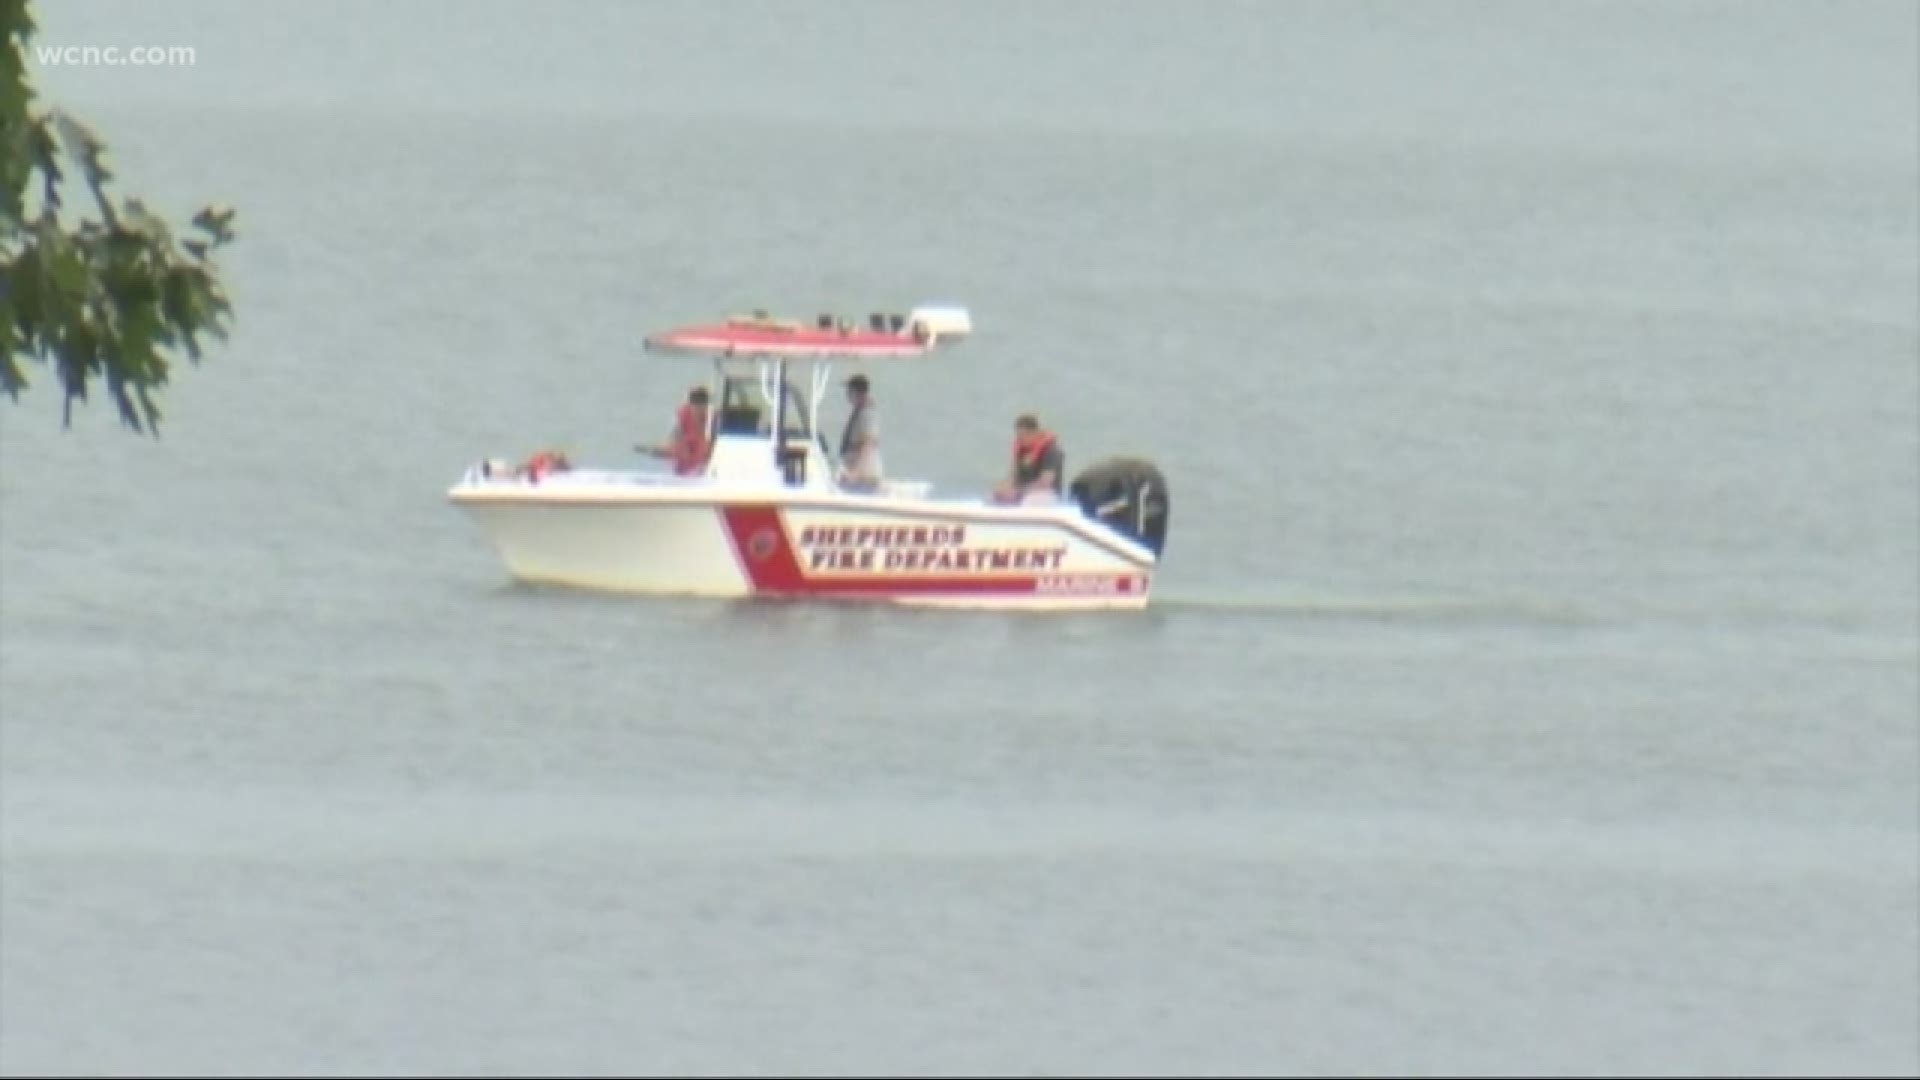 Crews found the body after searching for several hours on Saturday.